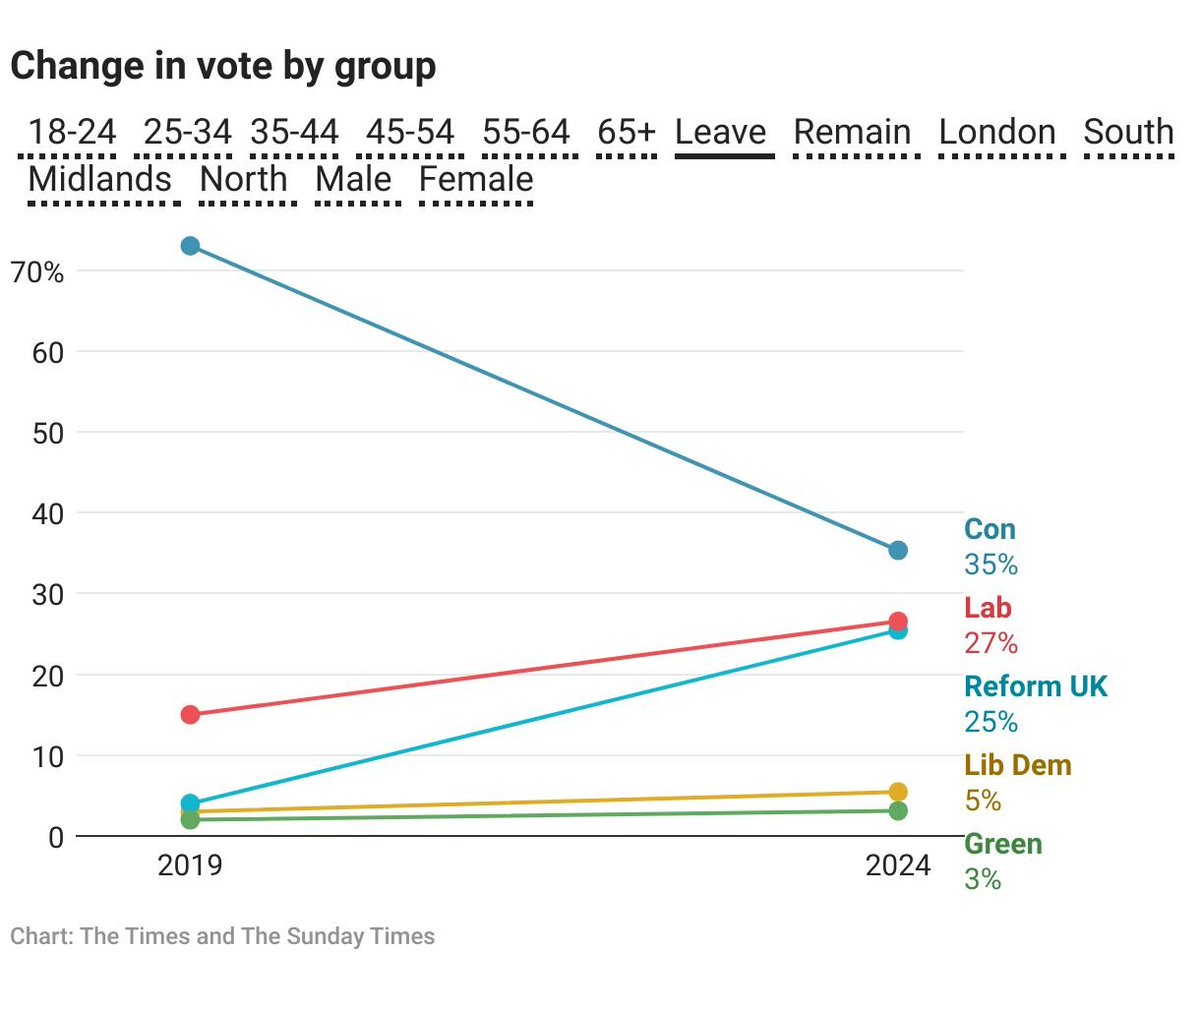 But given the broad national swing away from the Tories, what's quite interesting is just how little movement there has been among those who backed Remain in 2016 - whereas among Leave voters, Tory support has more than halved